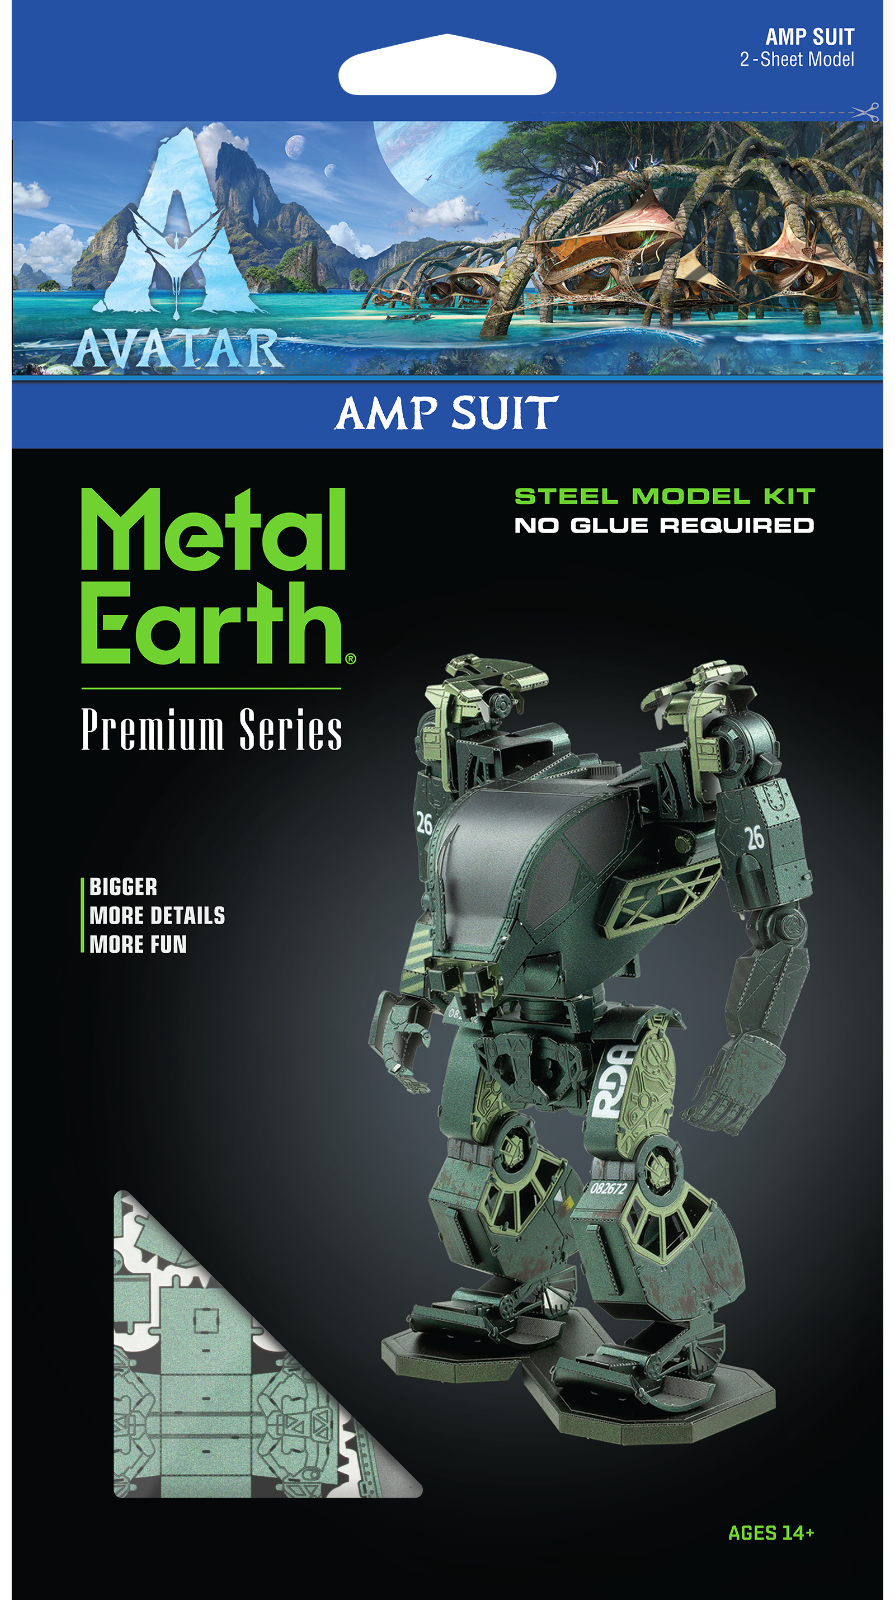 Metal Earth ICONX Avatar Amp Suit